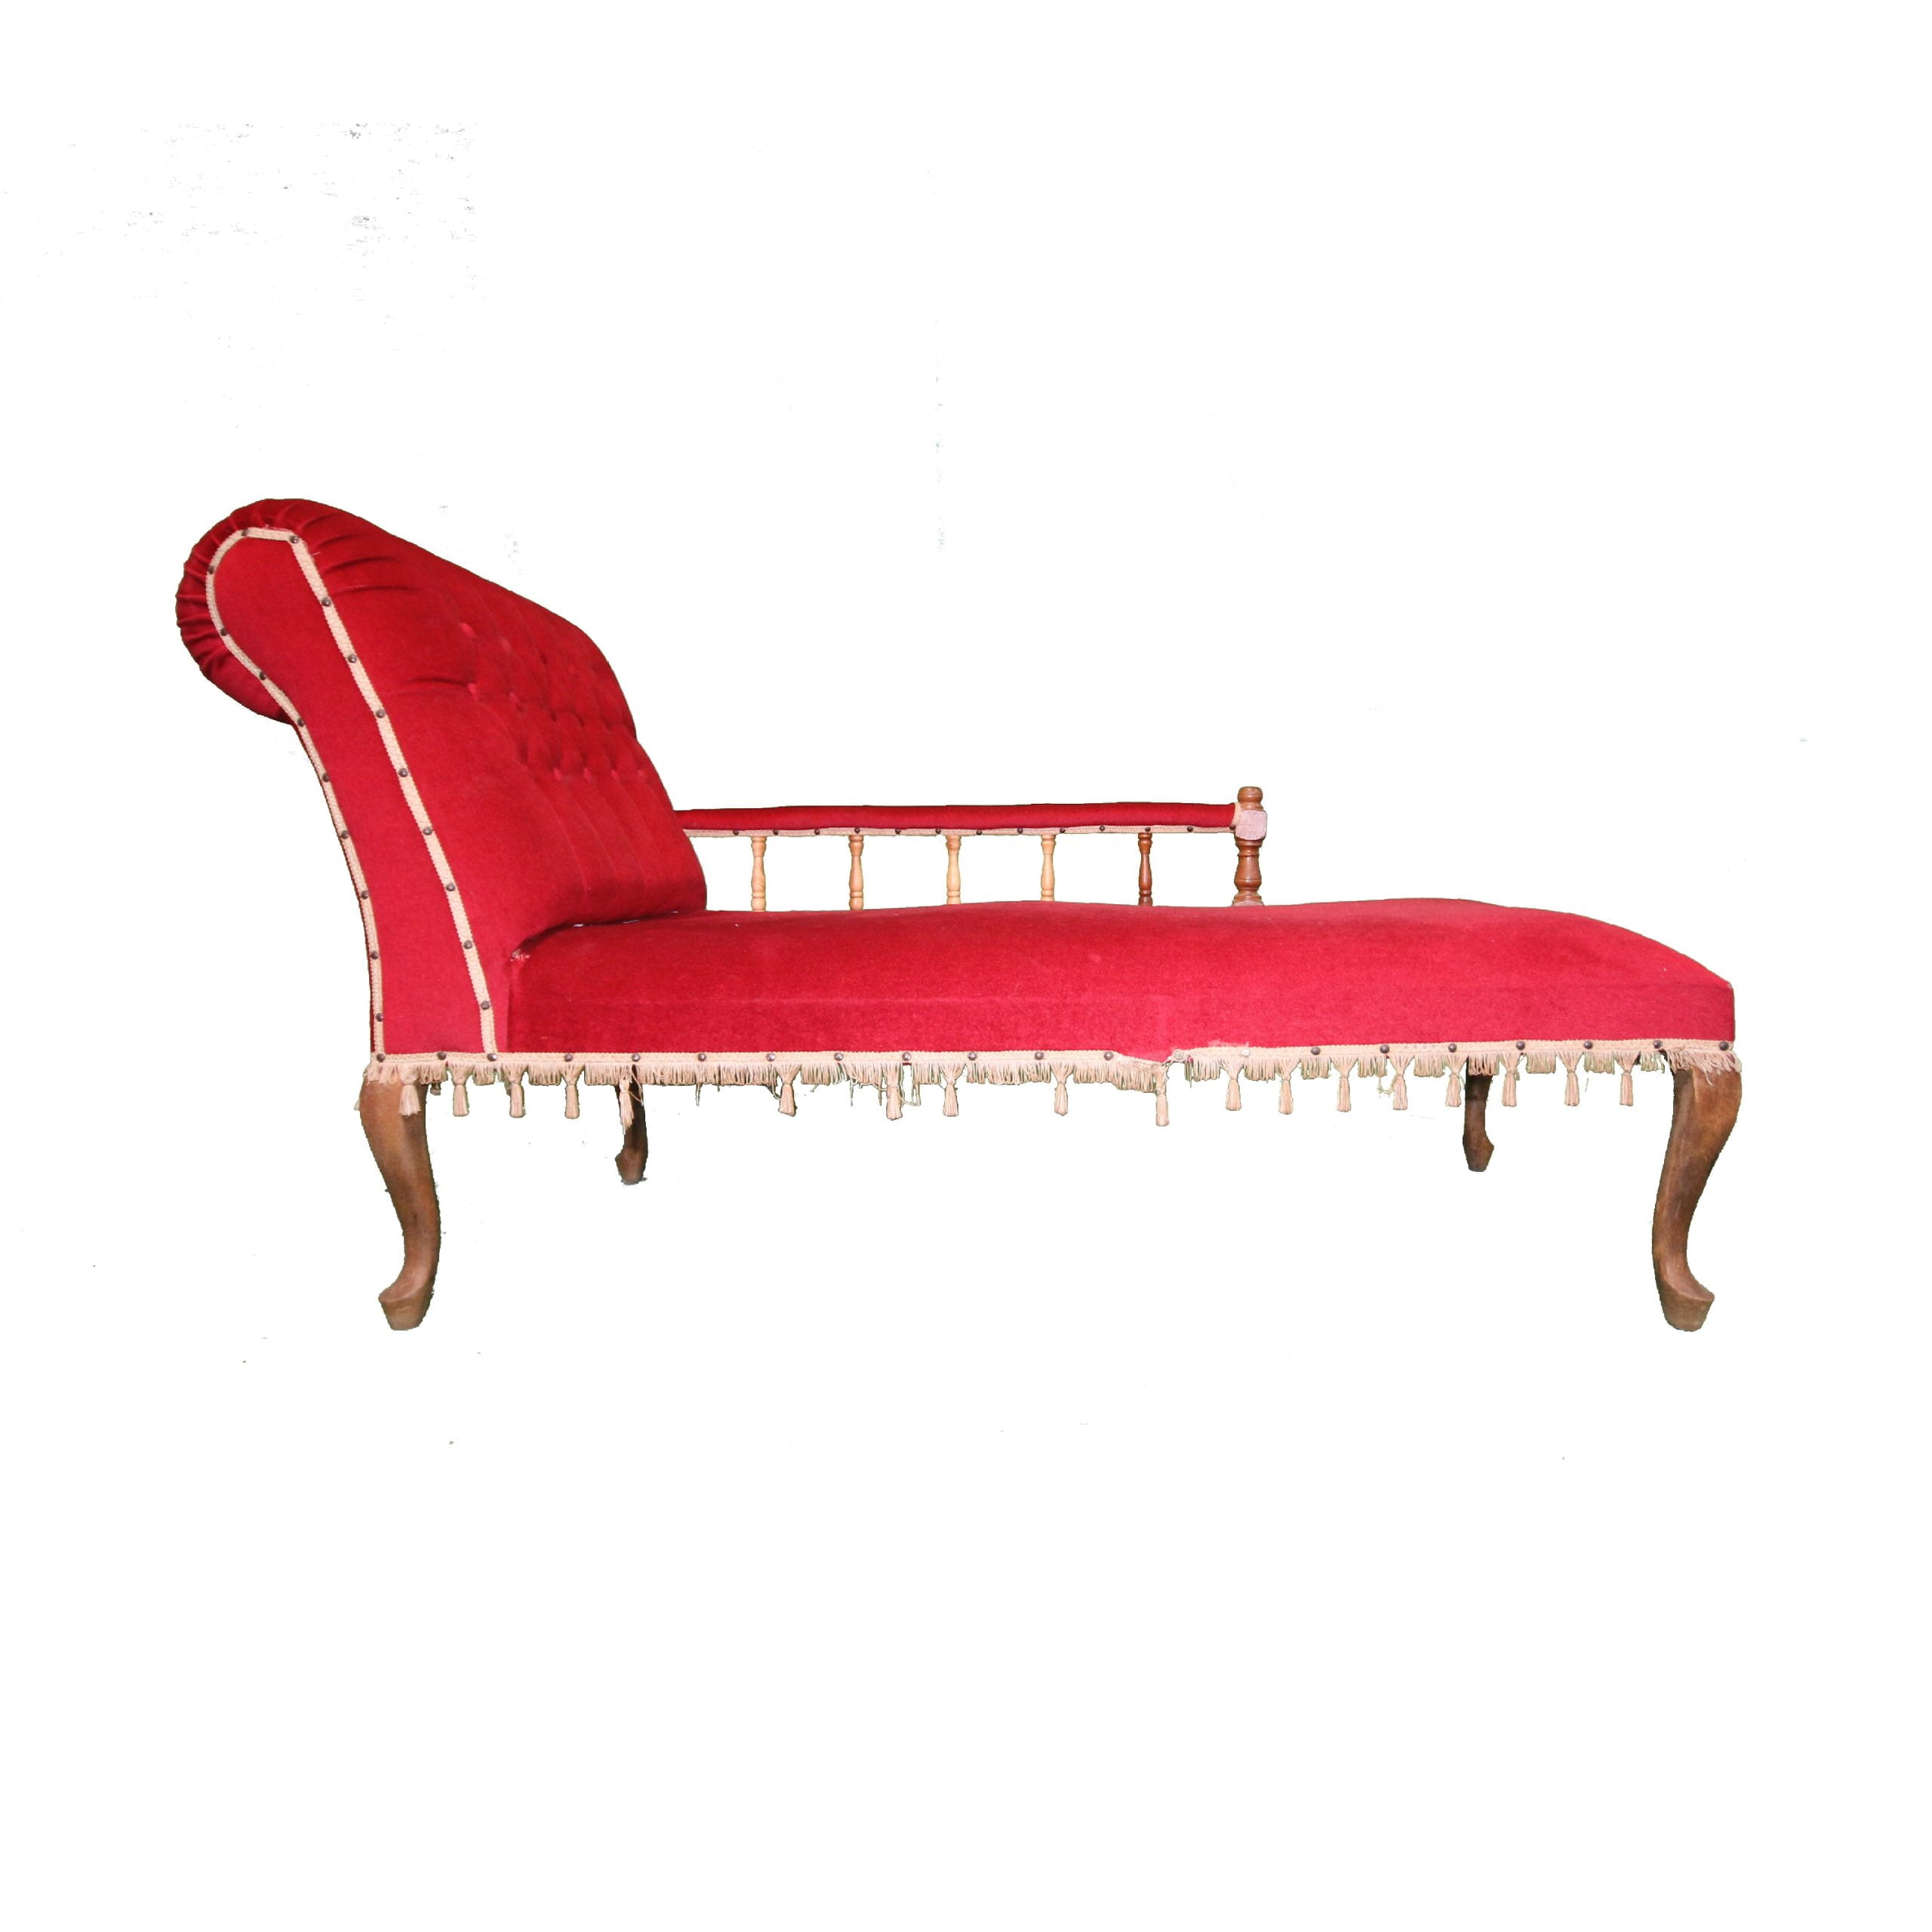 Queen anne style chaise lounge